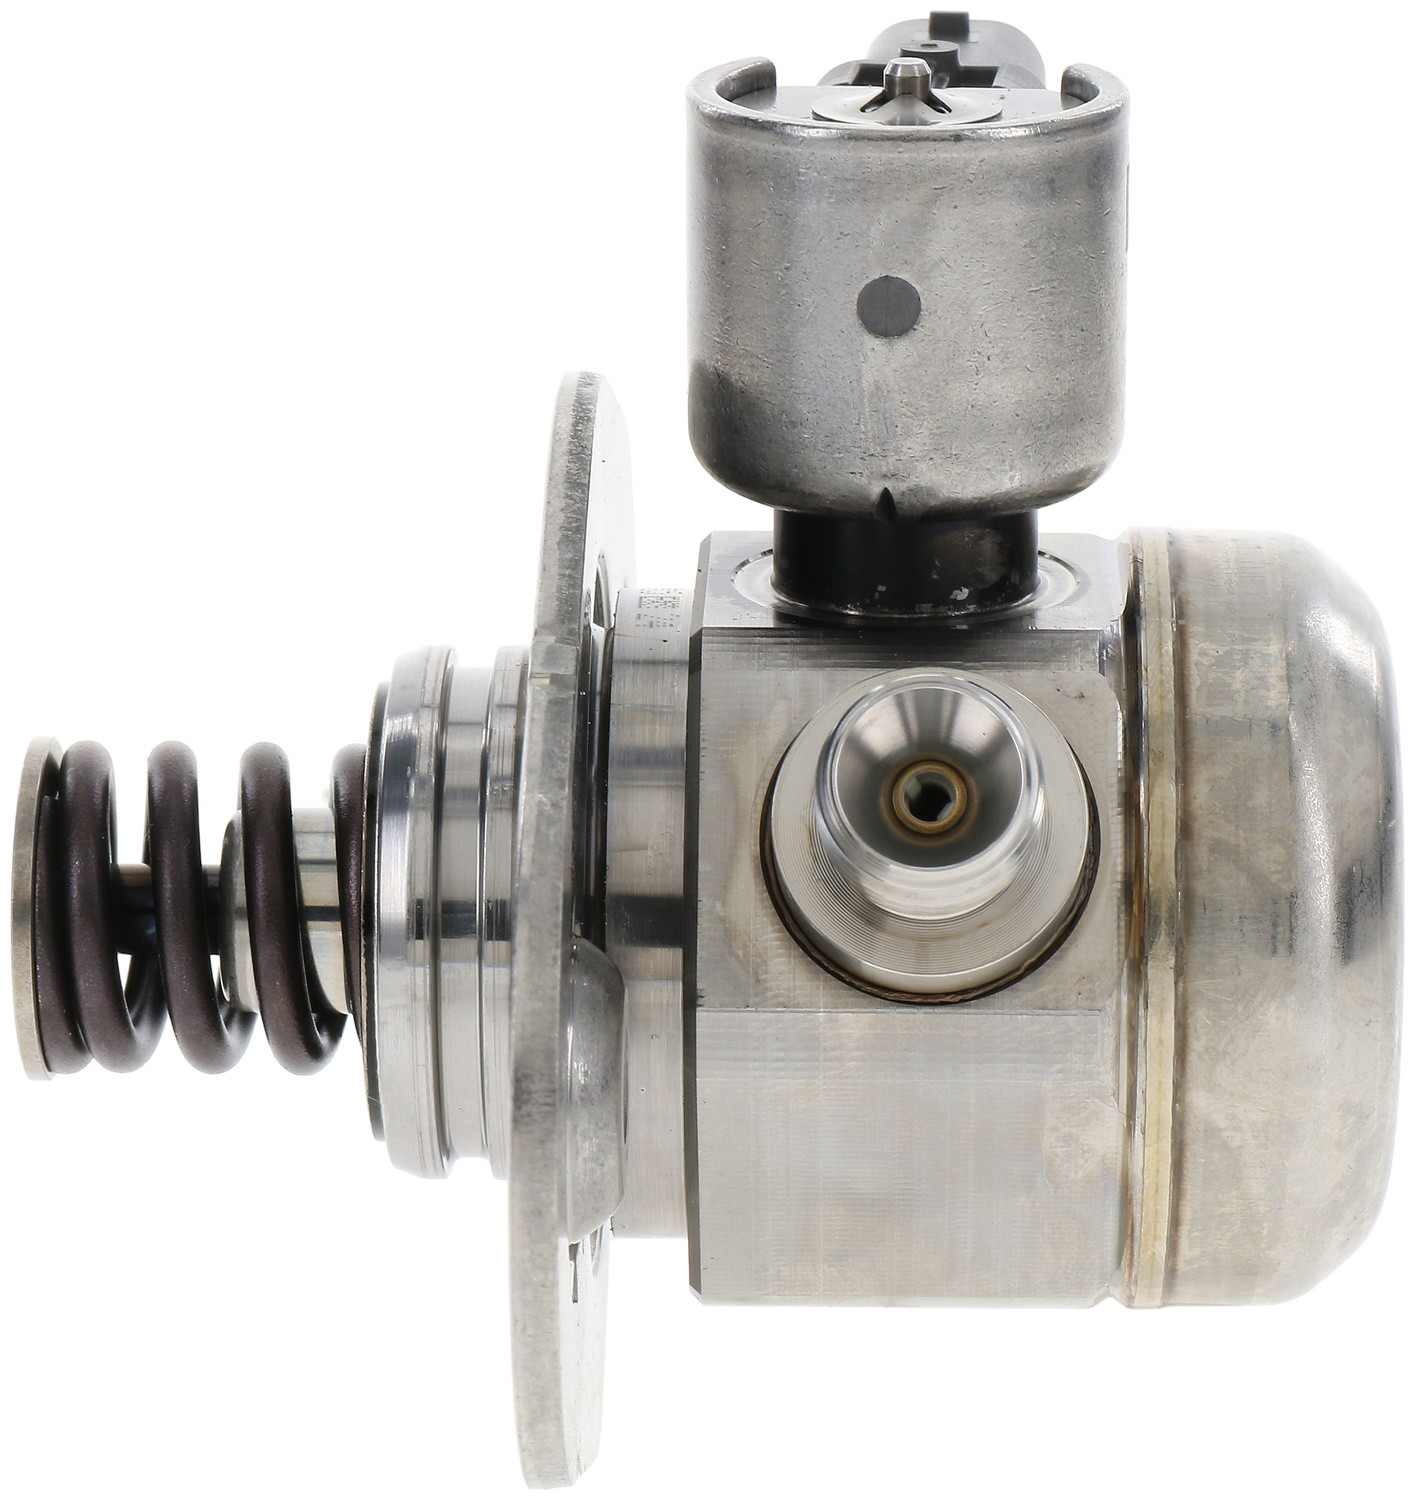 Left View of Direct Injection High Pressure Fuel Pump BOSCH 66828